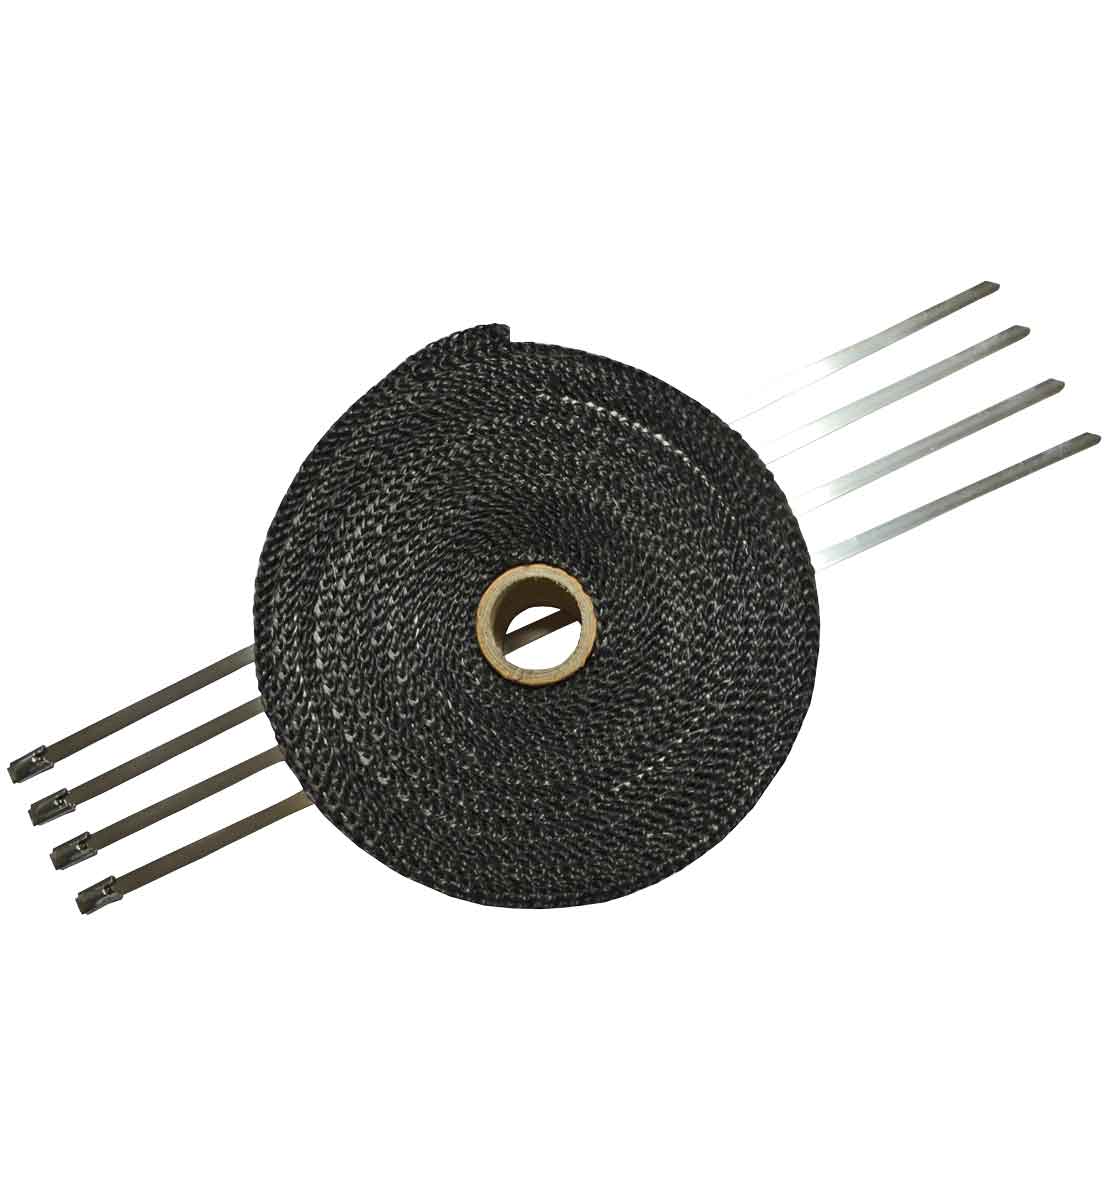 Exhaust Thermal Heat Wrap